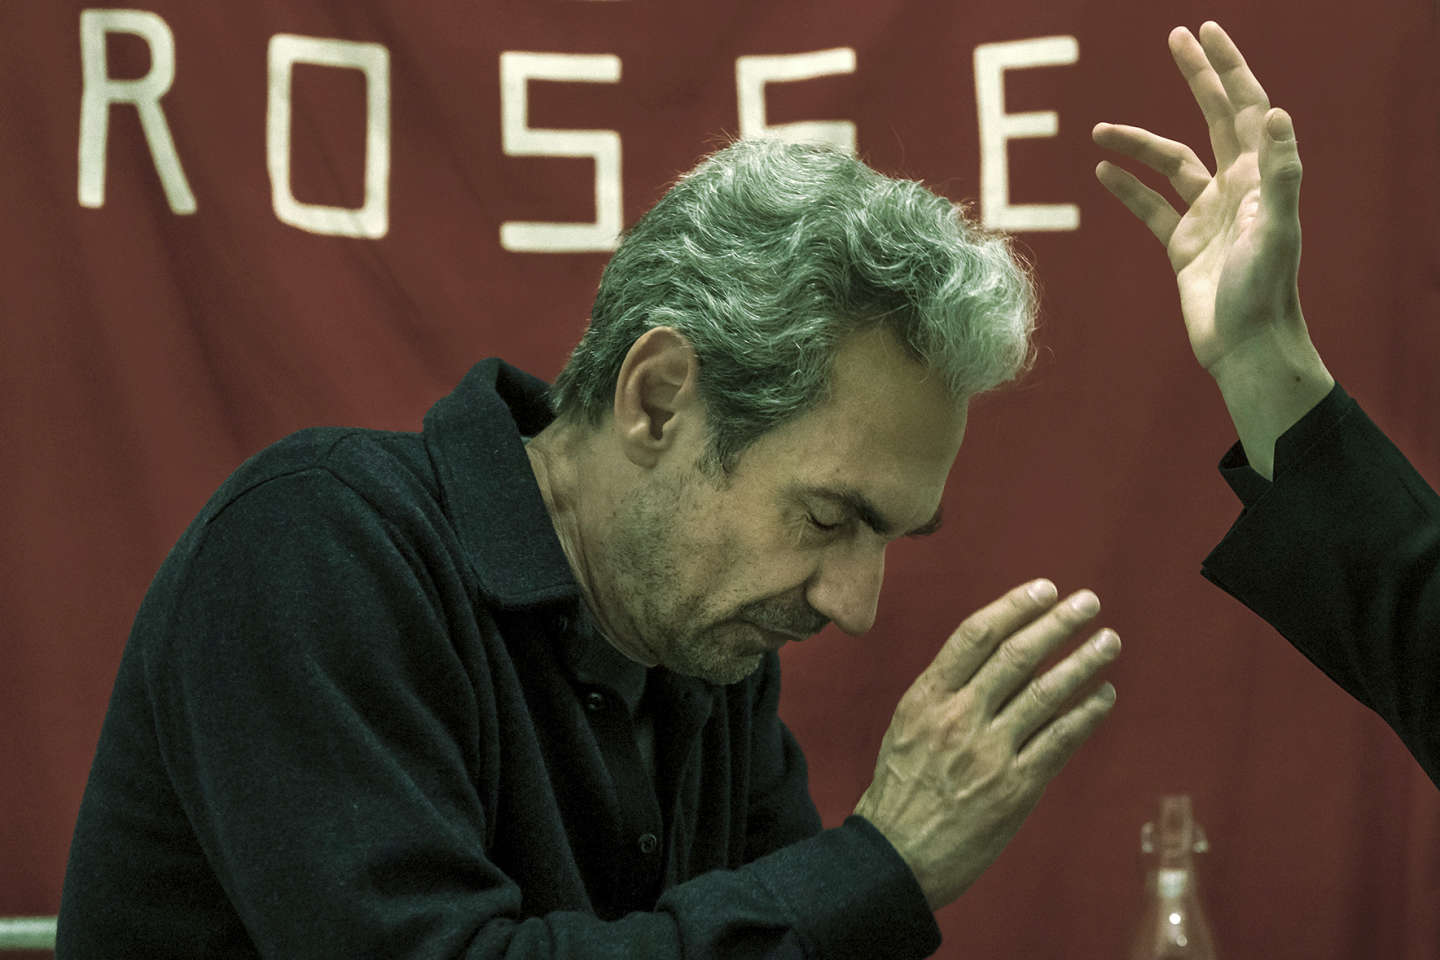 With “Esterno notte”, Marco Bellocchio plunges back into the Italian night